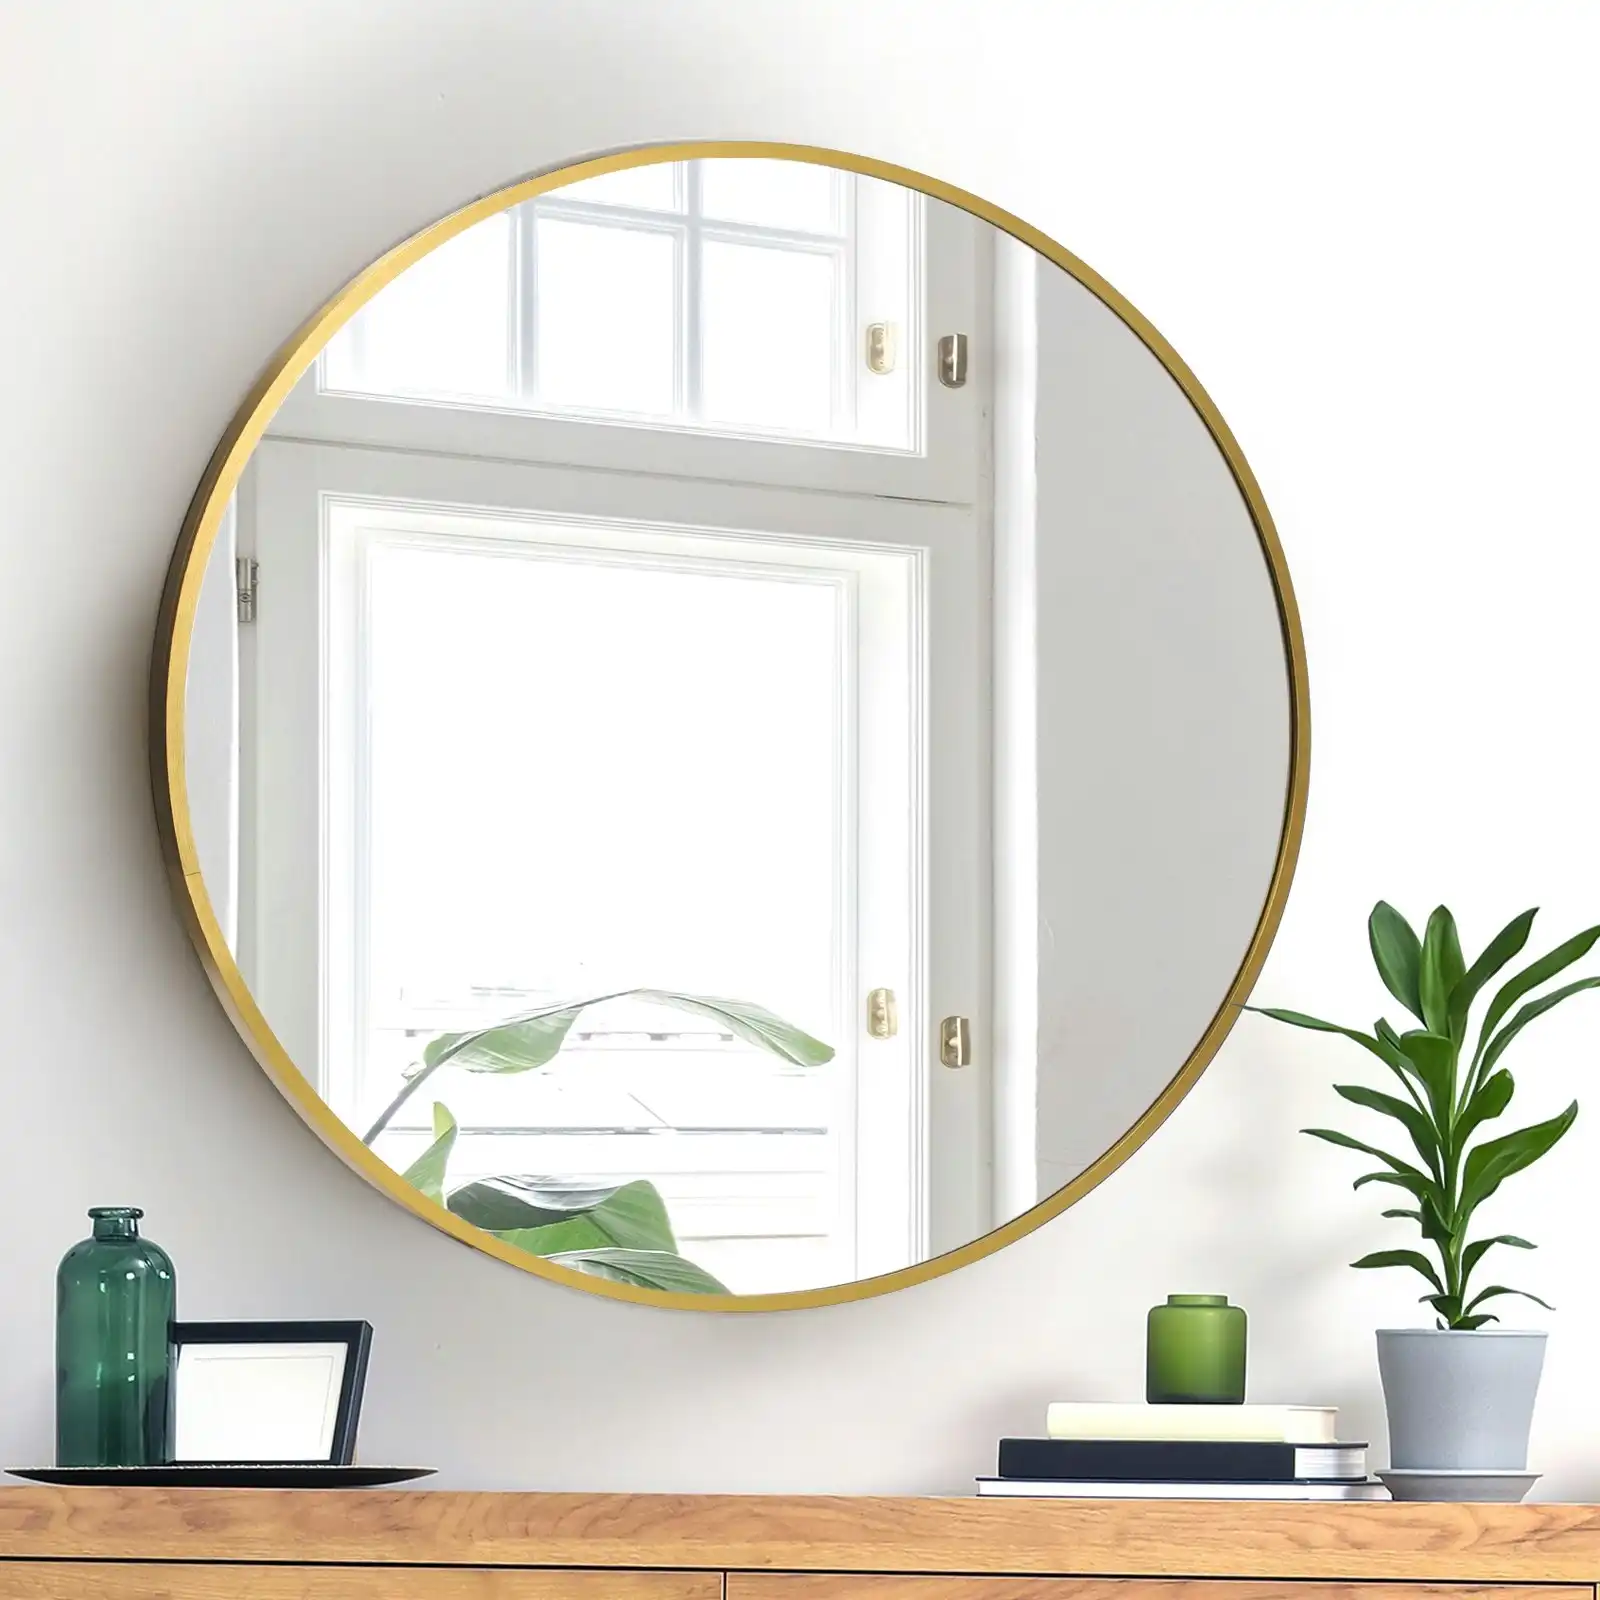 Oikiture Wall Mirrors Round 70cm Makeup Mirror Vanity Home Decor Gold